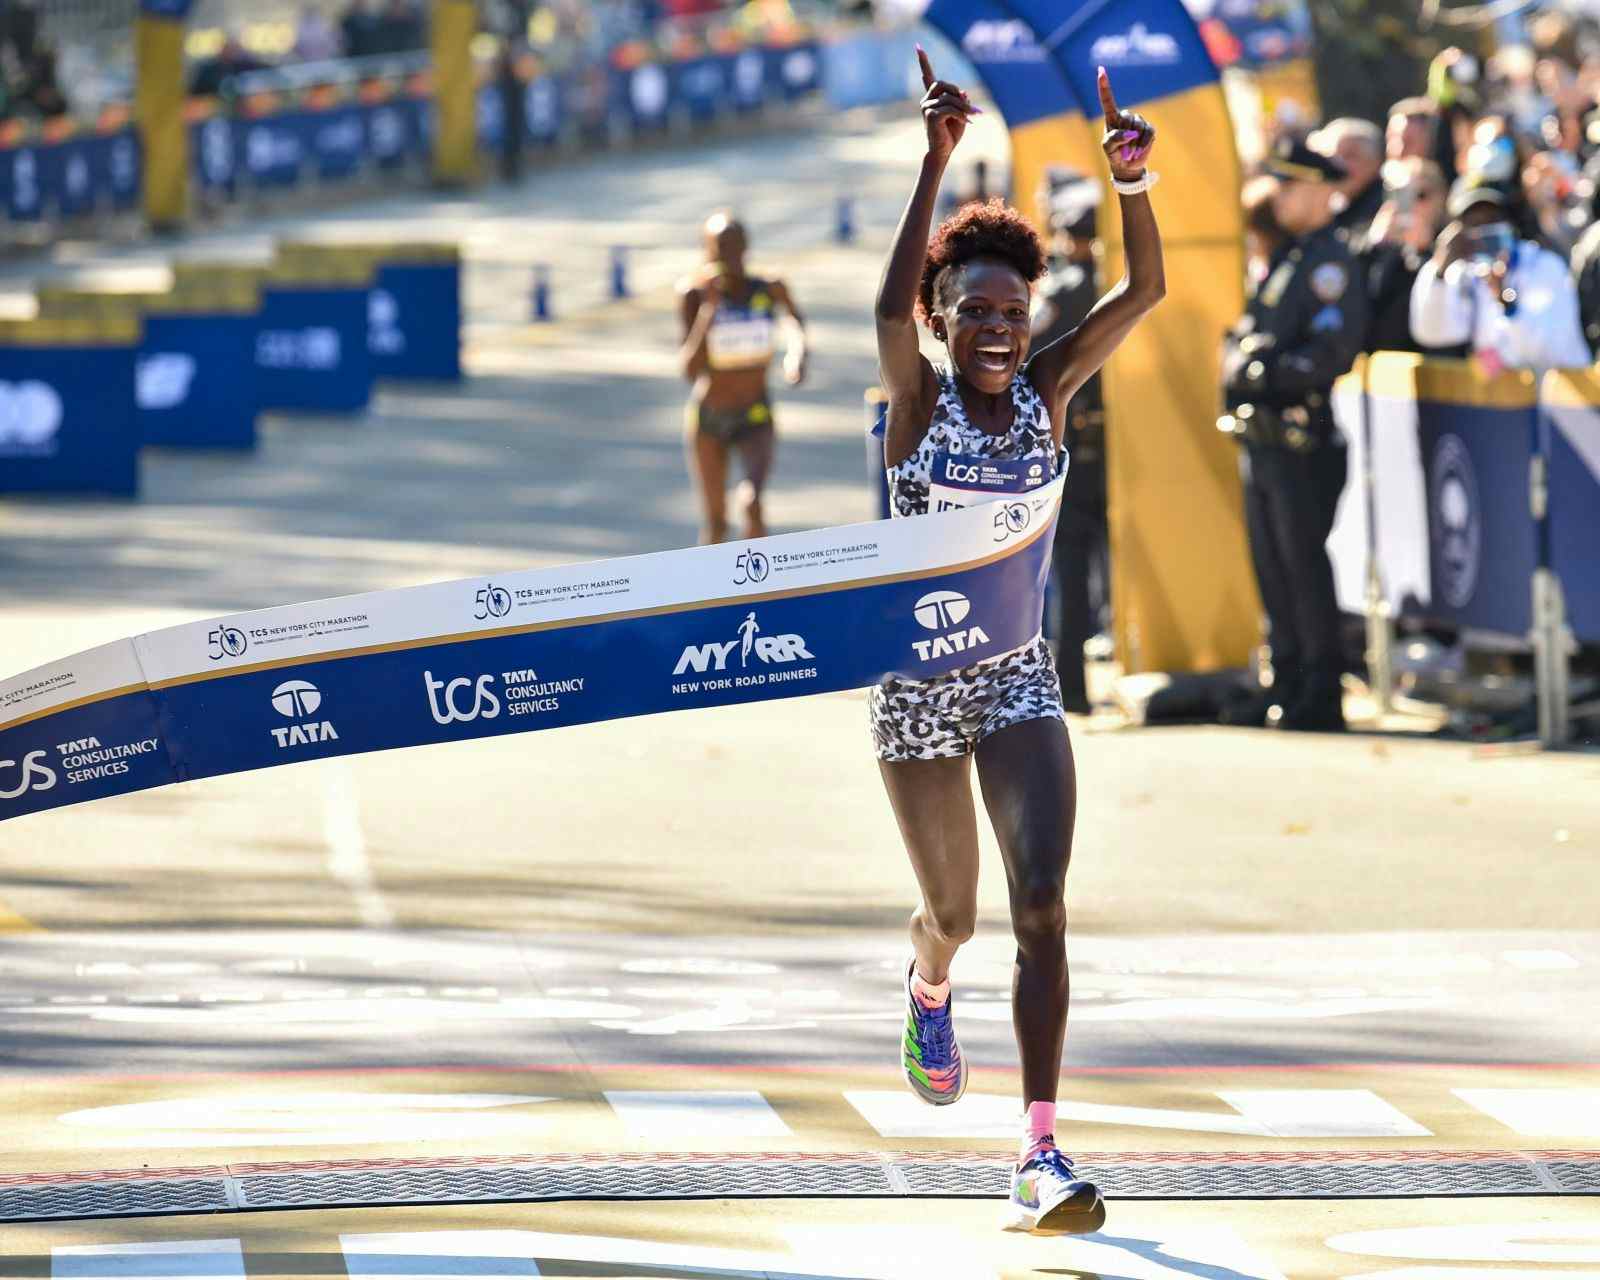 Peres Jepchirchir is seen winning the Professional Women's Division during the 2021 TCS New York City Marathon on November 07, 2021 in NYC (Bryan Bedder/New York Road Runners via Getty Images)